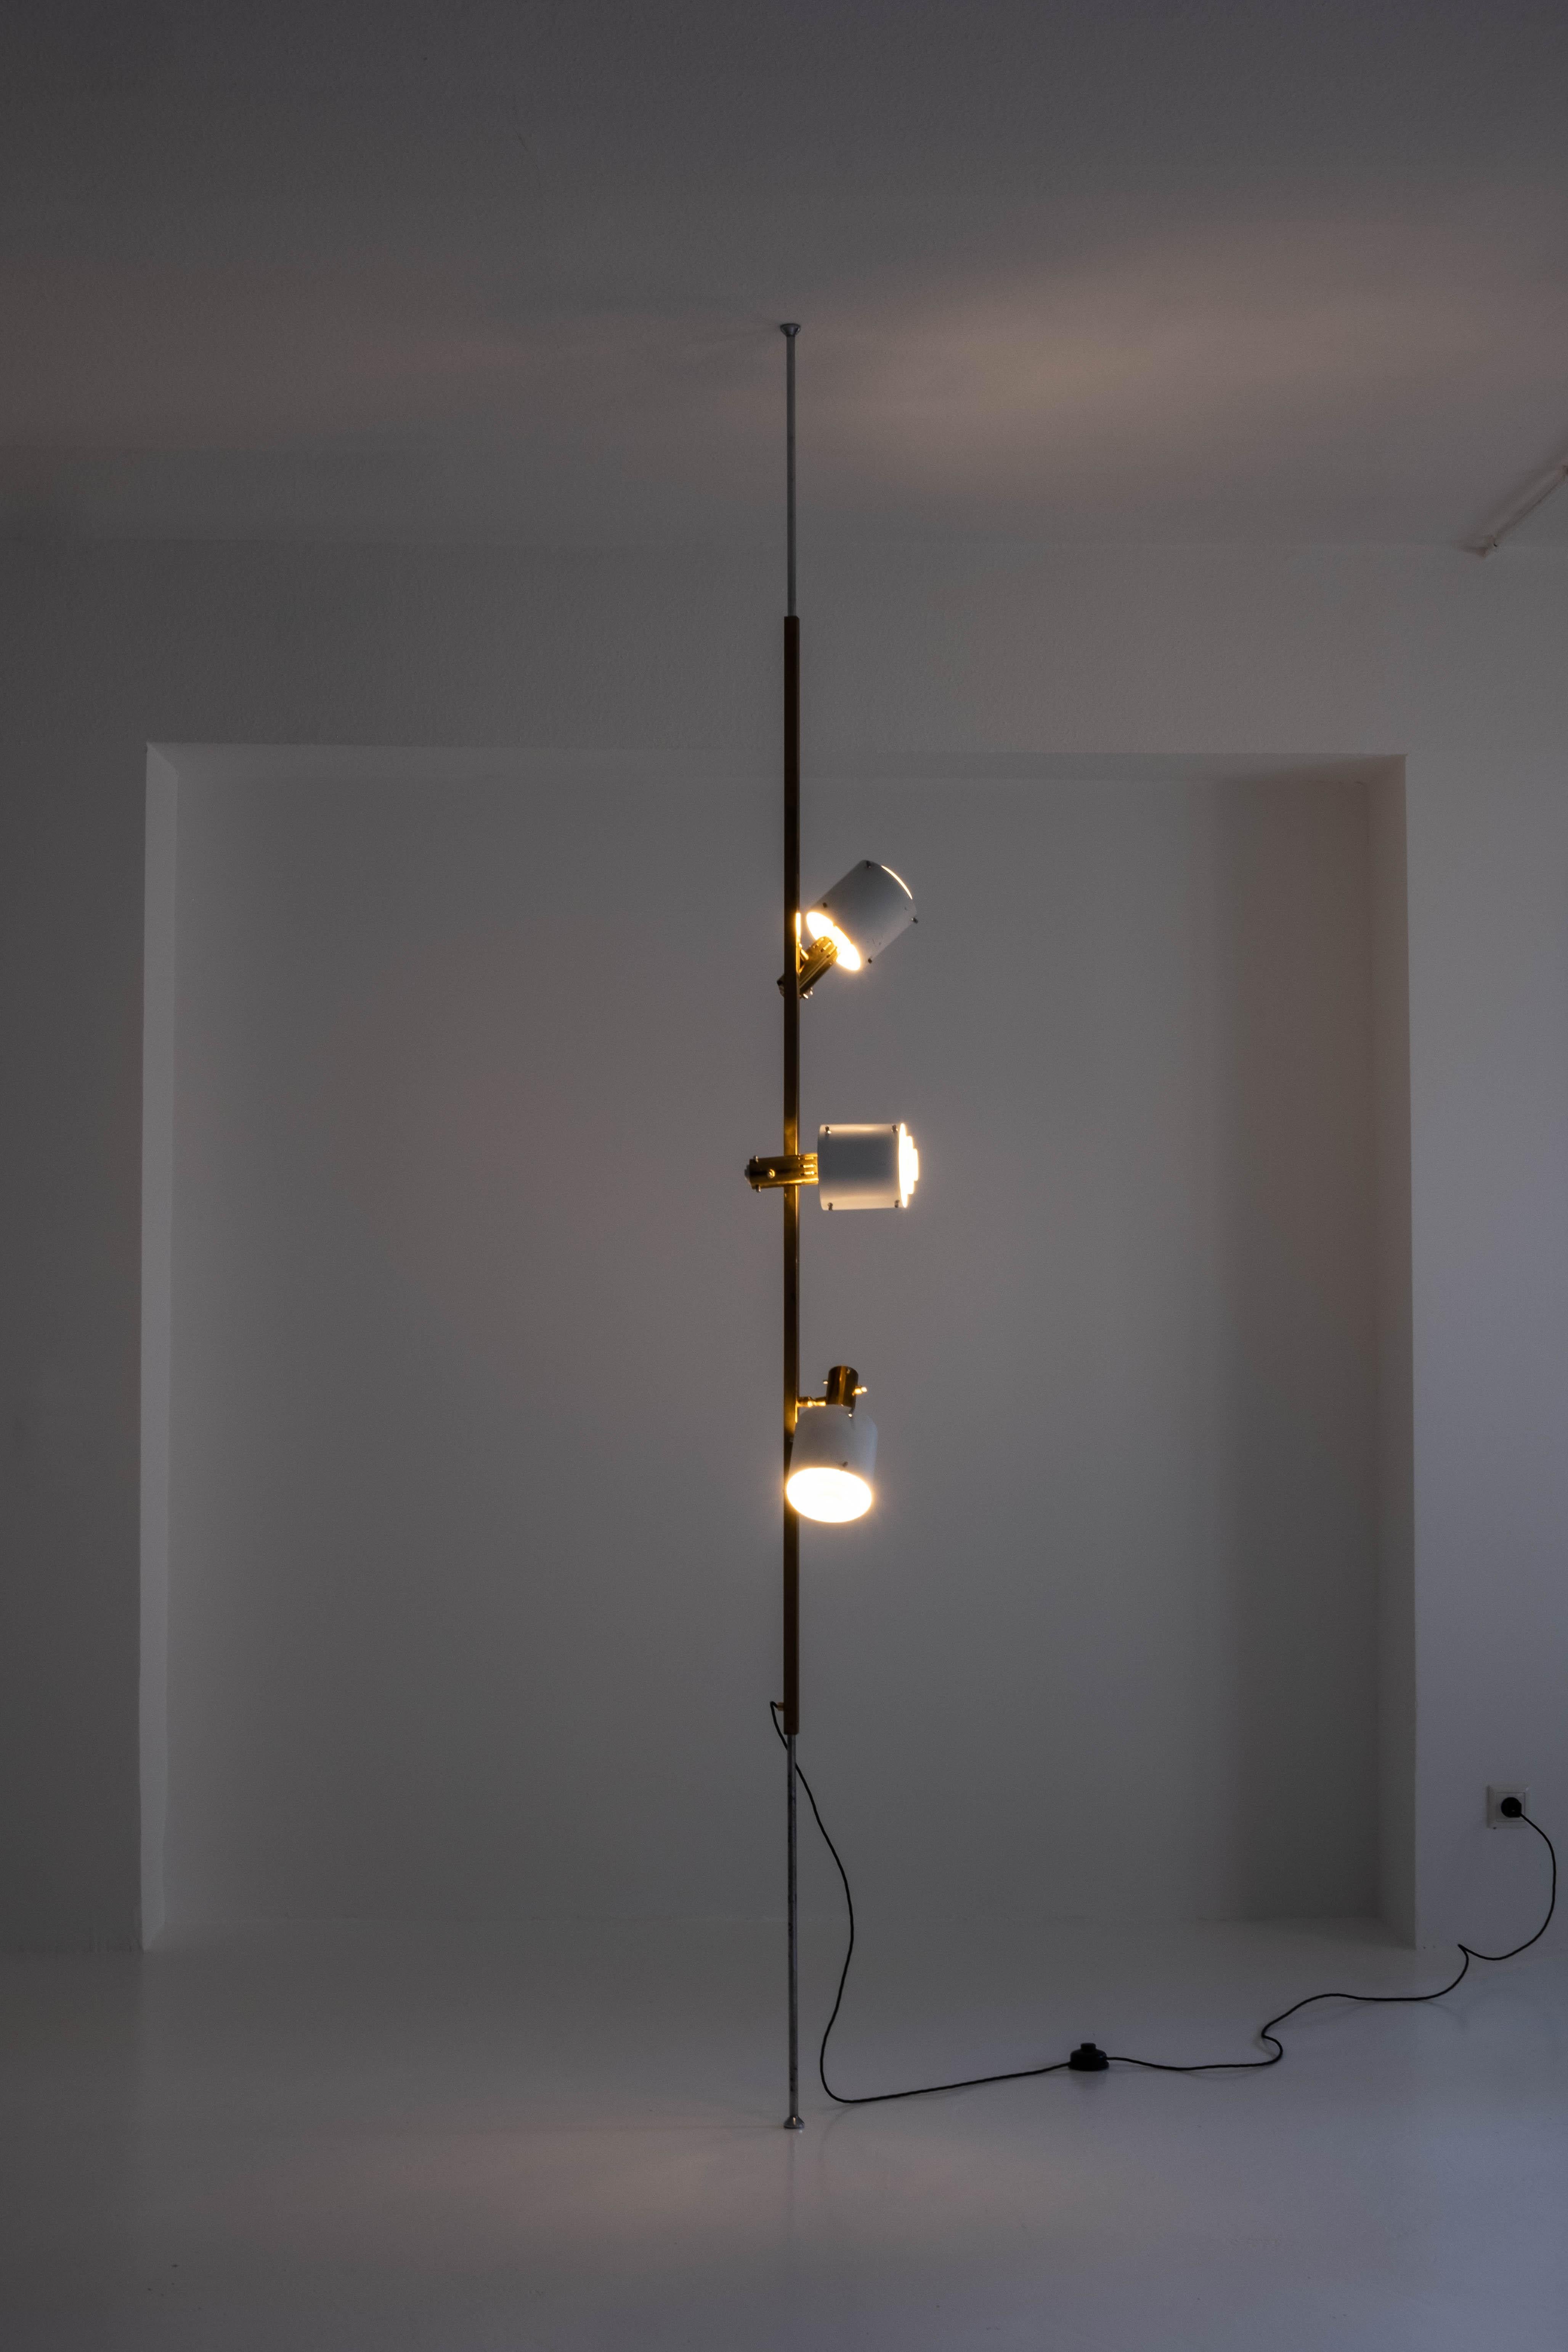 Mid-Century Modern Unique Luminaire/ Light / Floor Lamp Clamped Between the Ceiling and Floor